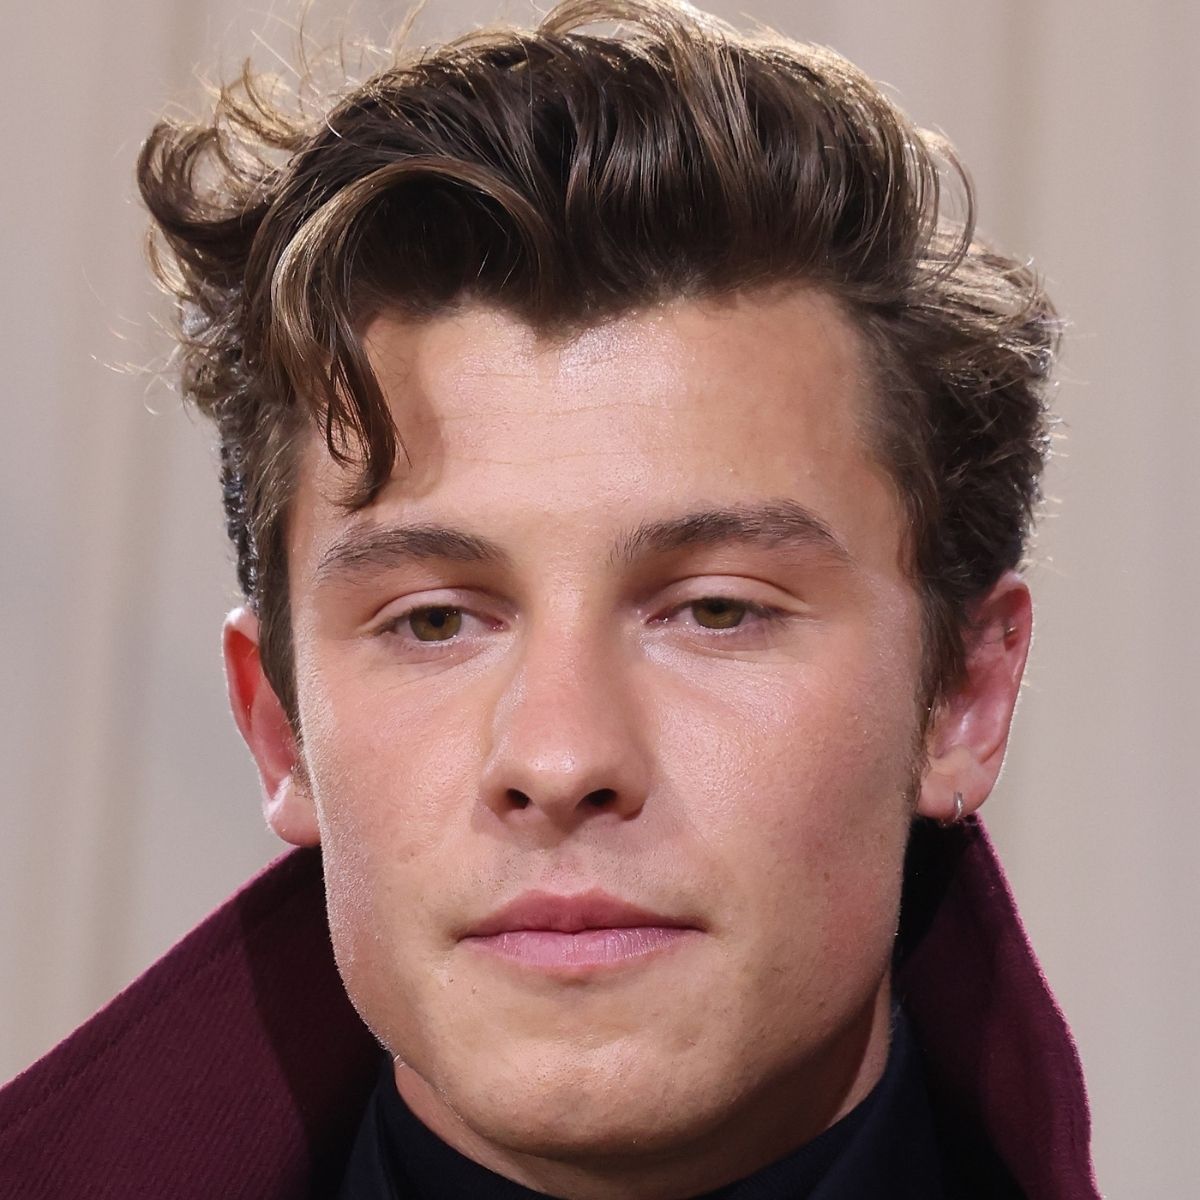 Shawn Mendes Debuts New Shaved Head & Ditches His Signature Curls | Shawn  Mendes | Just Jared: Celebrity Gossip and Breaking Entertainment News